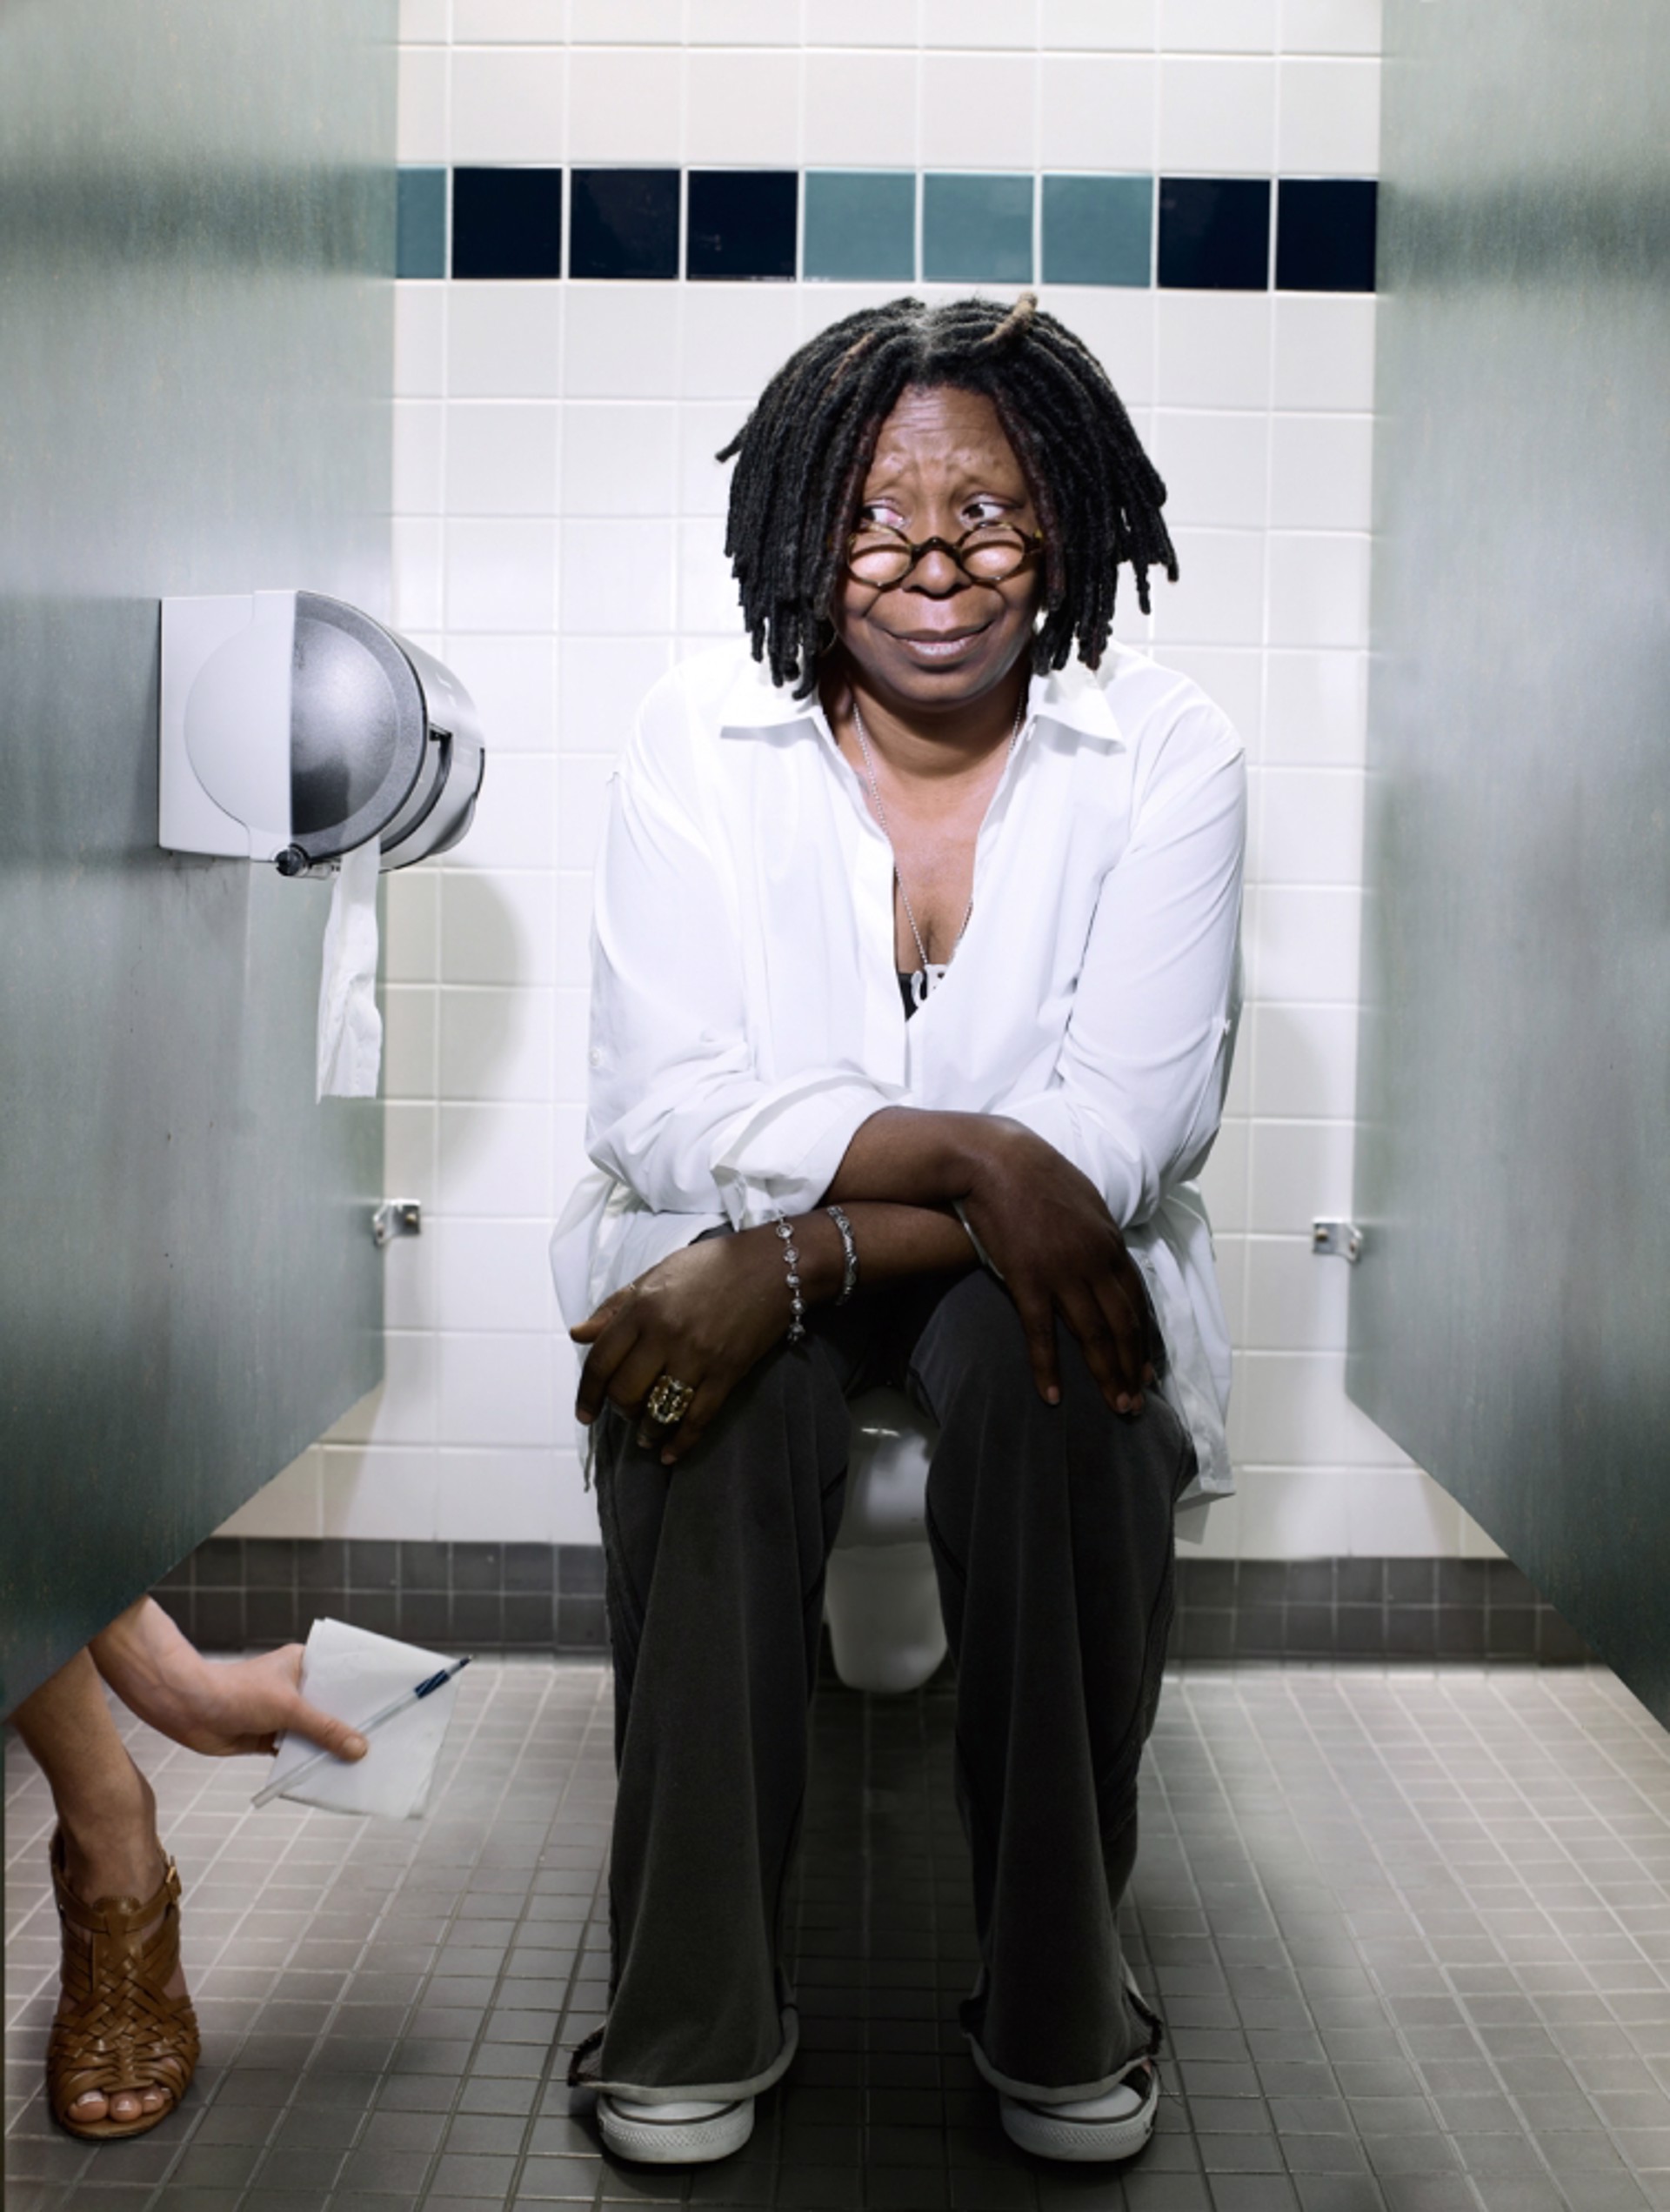 10009 Whoopi Goldberg Toilet 2010 Color by Timothy White